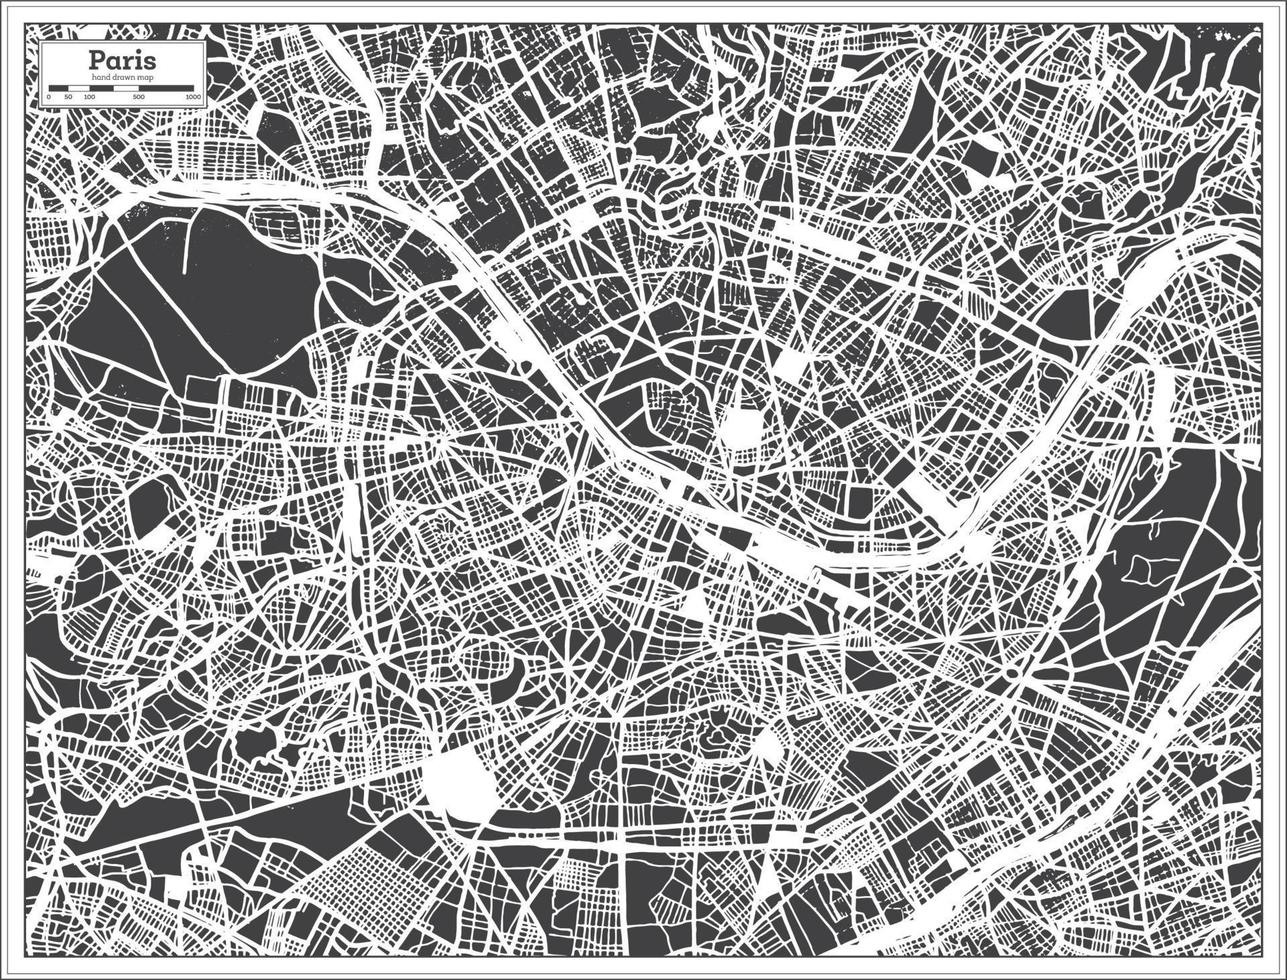 Paris France City Map in Black and White Color in Retro Style. Outline Map. vector